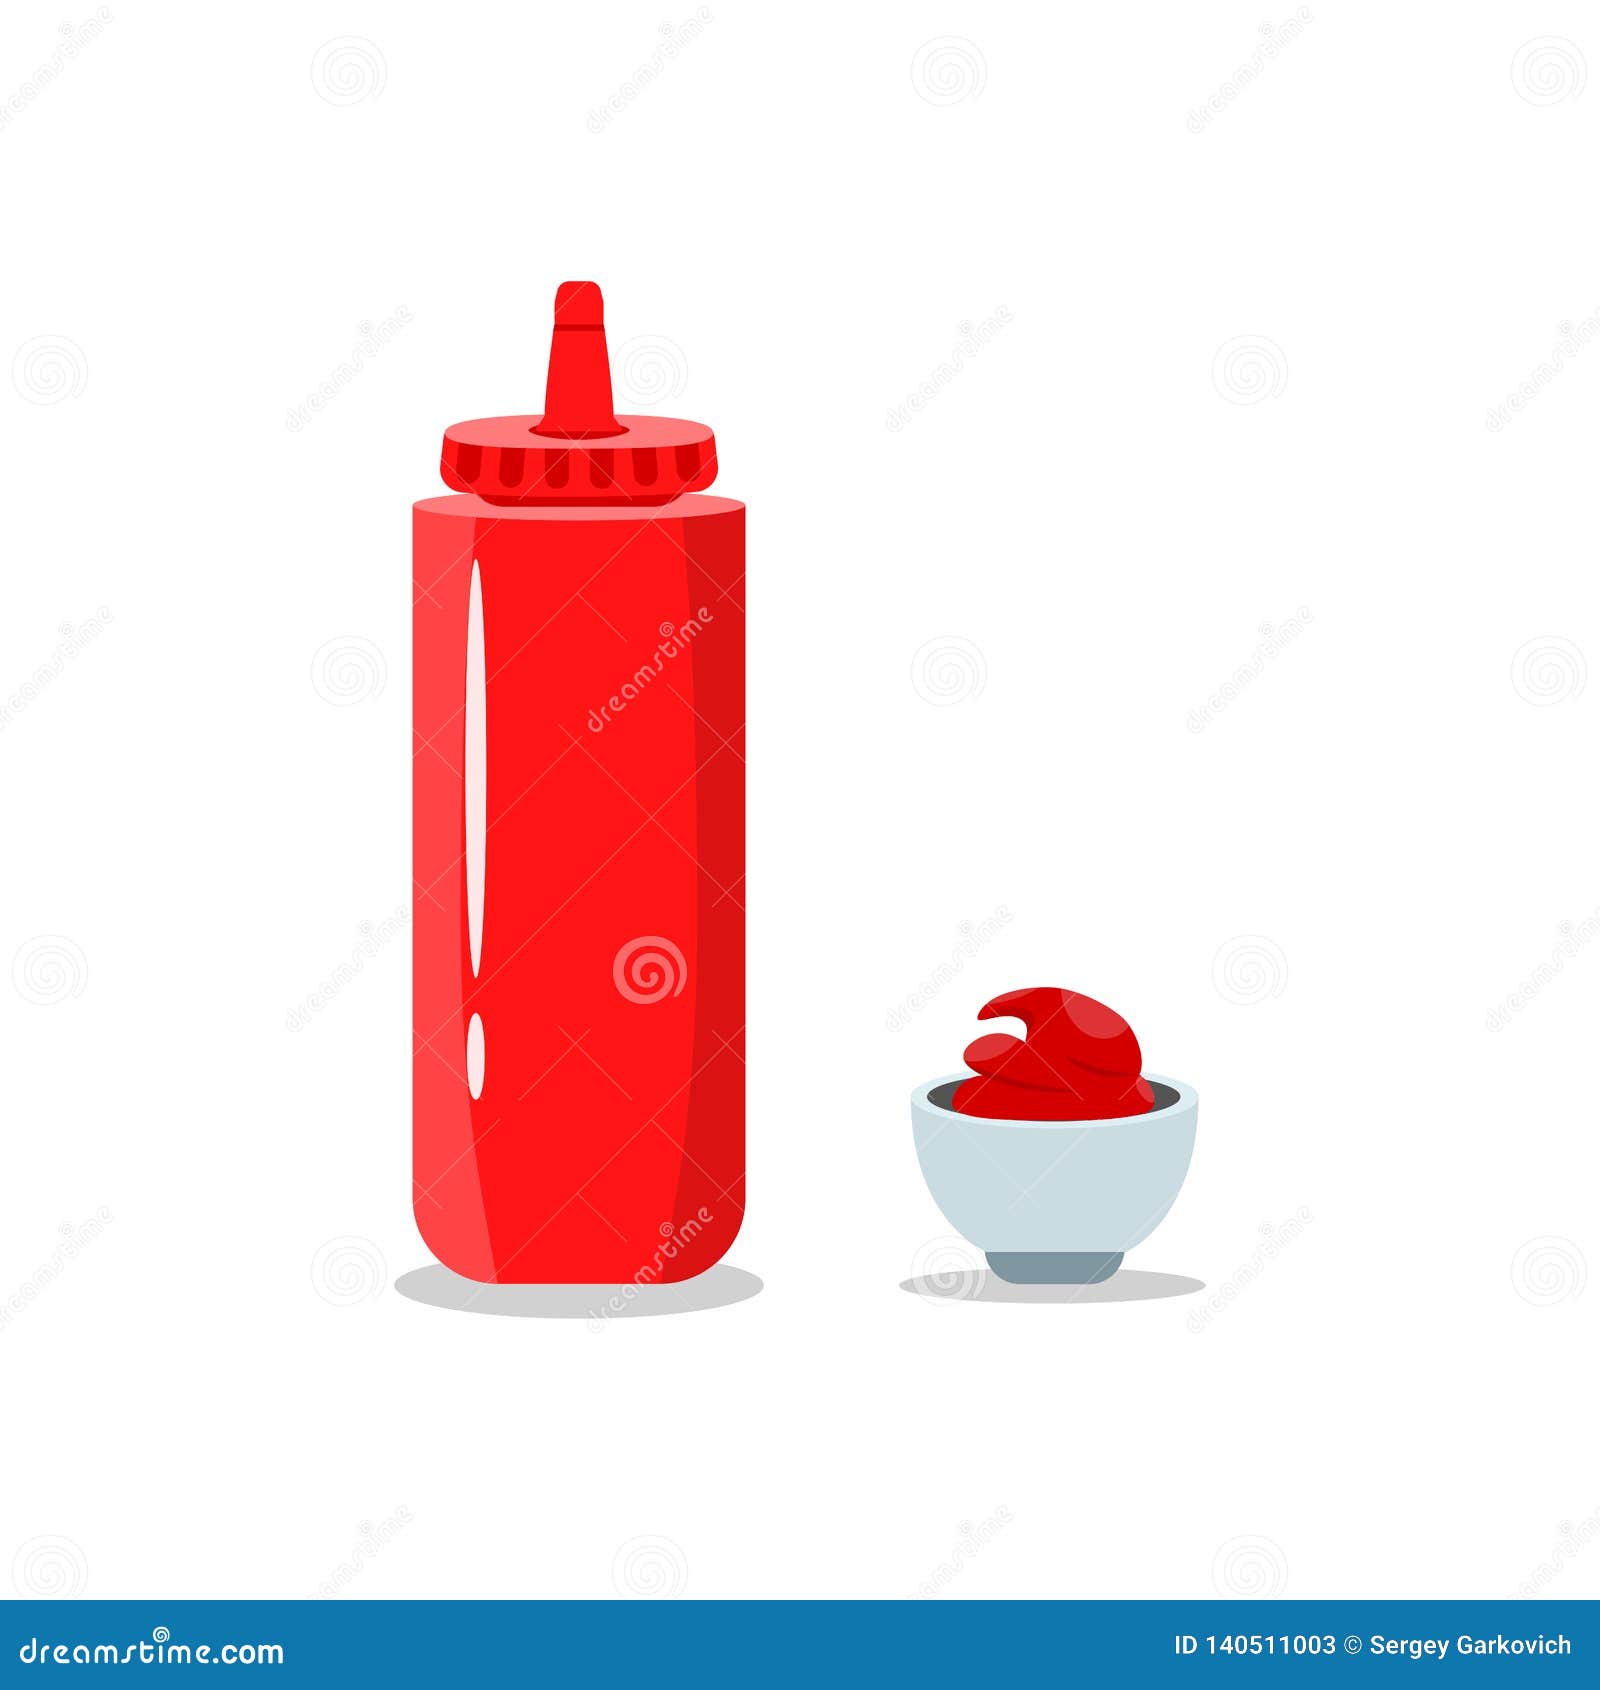 Tomato Ketchup Bottle Isolated on Background. Sauce for Hot Dog, Fast Food  Stock Vector - Illustration of eating, ketchup: 140511003